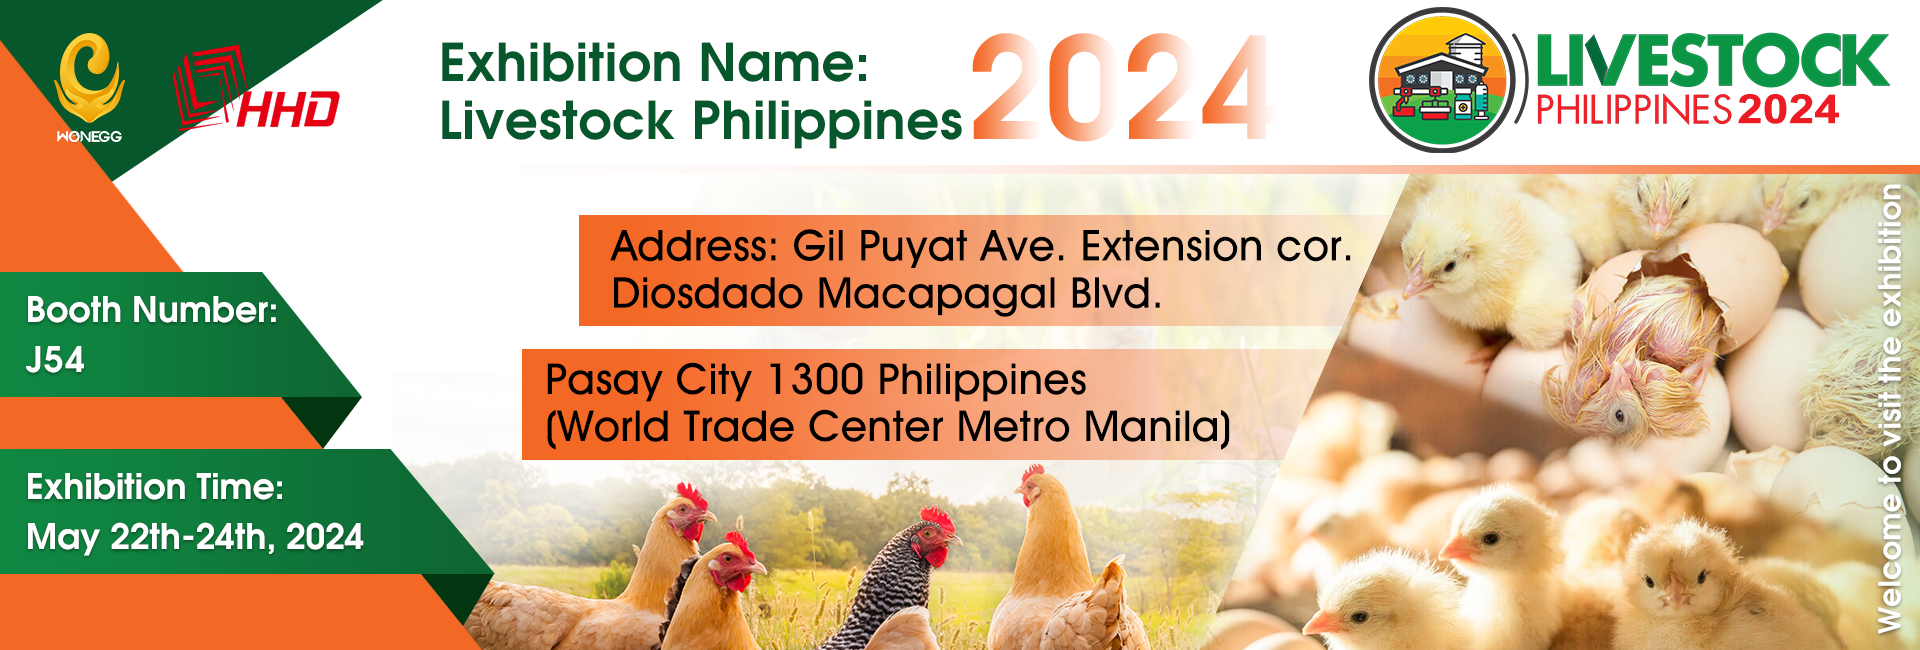 Philippine Livestock Exhibition 2024 is About to Open